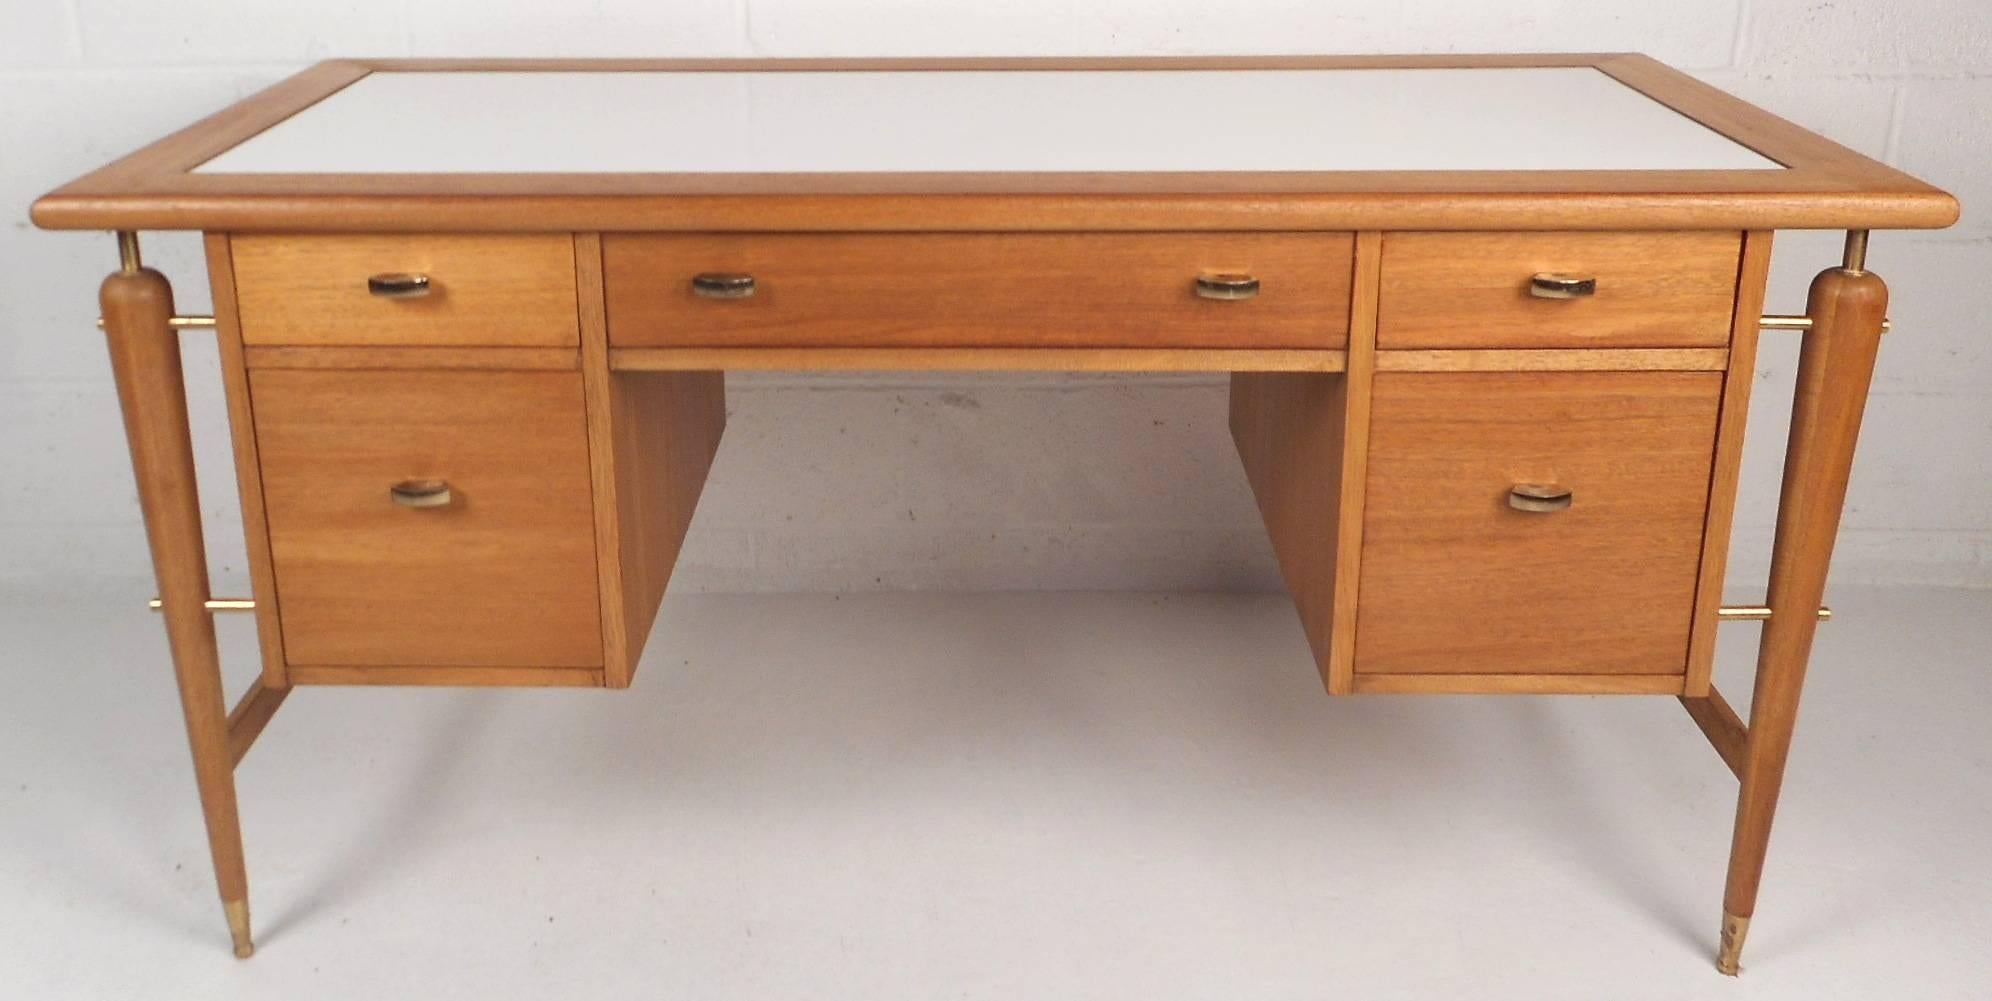 This stunning vintage modern desk is made of mahogany wood and features a unique white laminate top. This mid-century case piece offers plenty of work space and room for storage within its five large drawers. Stylish floating design with four long